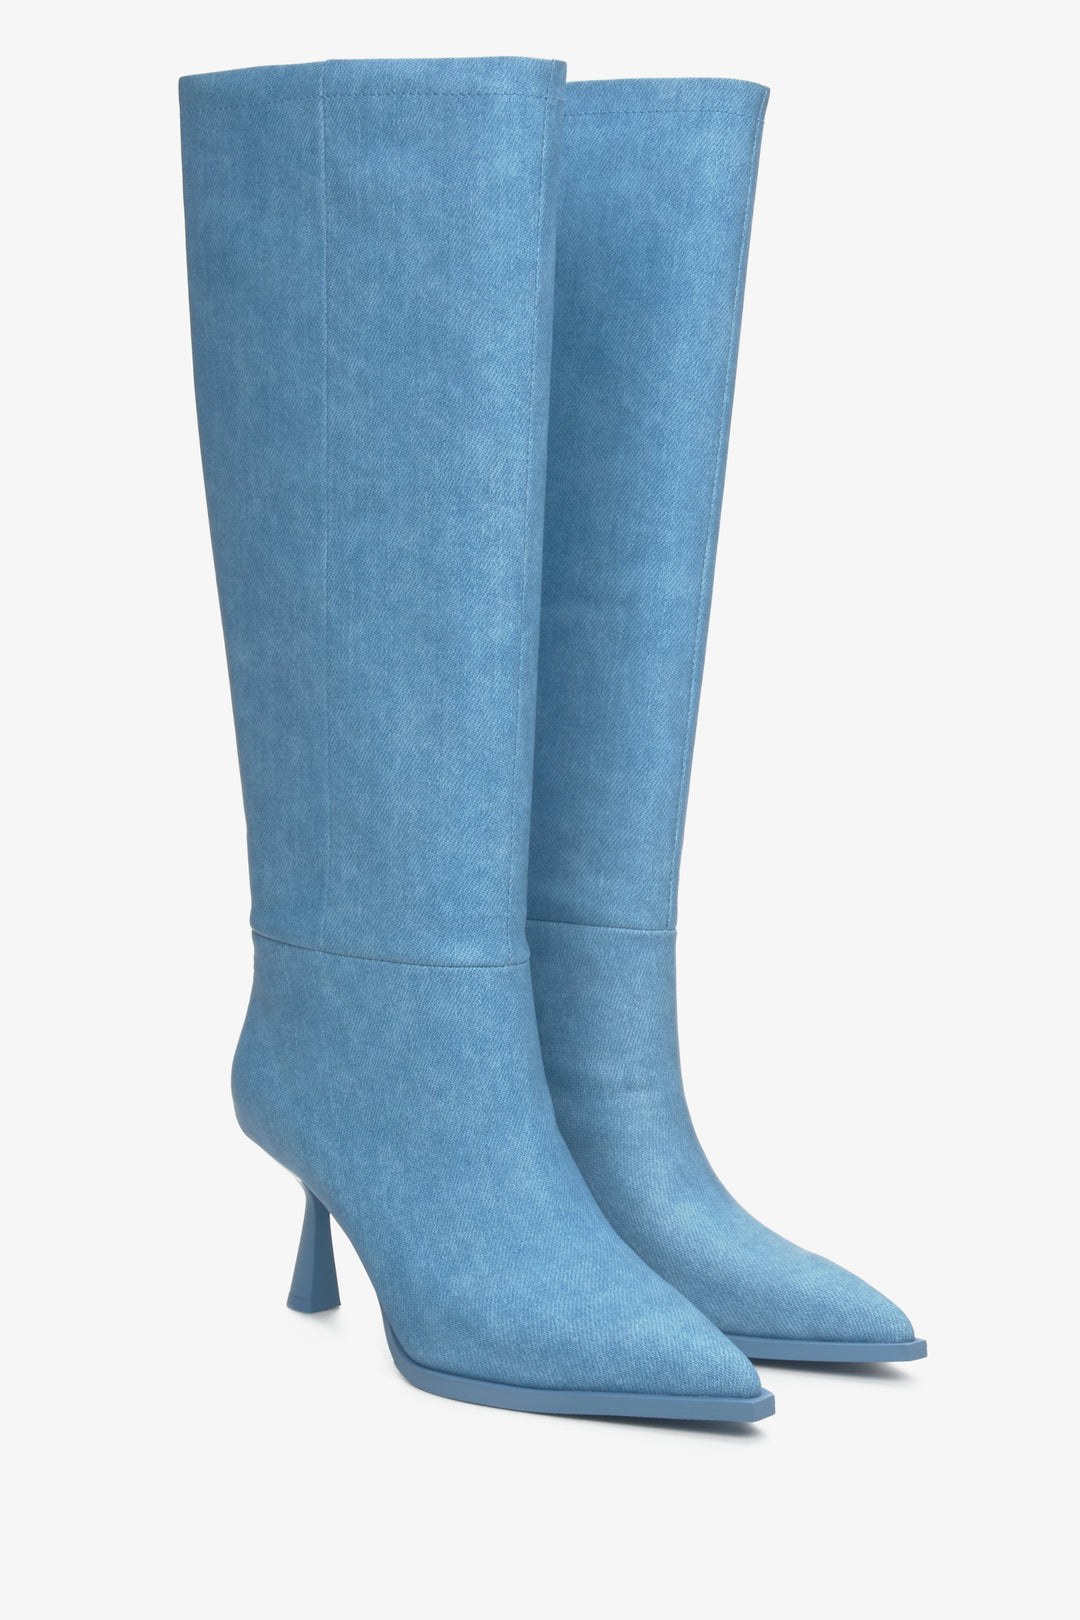 Knee-high blue women's boots with a wide shaft by Estro.